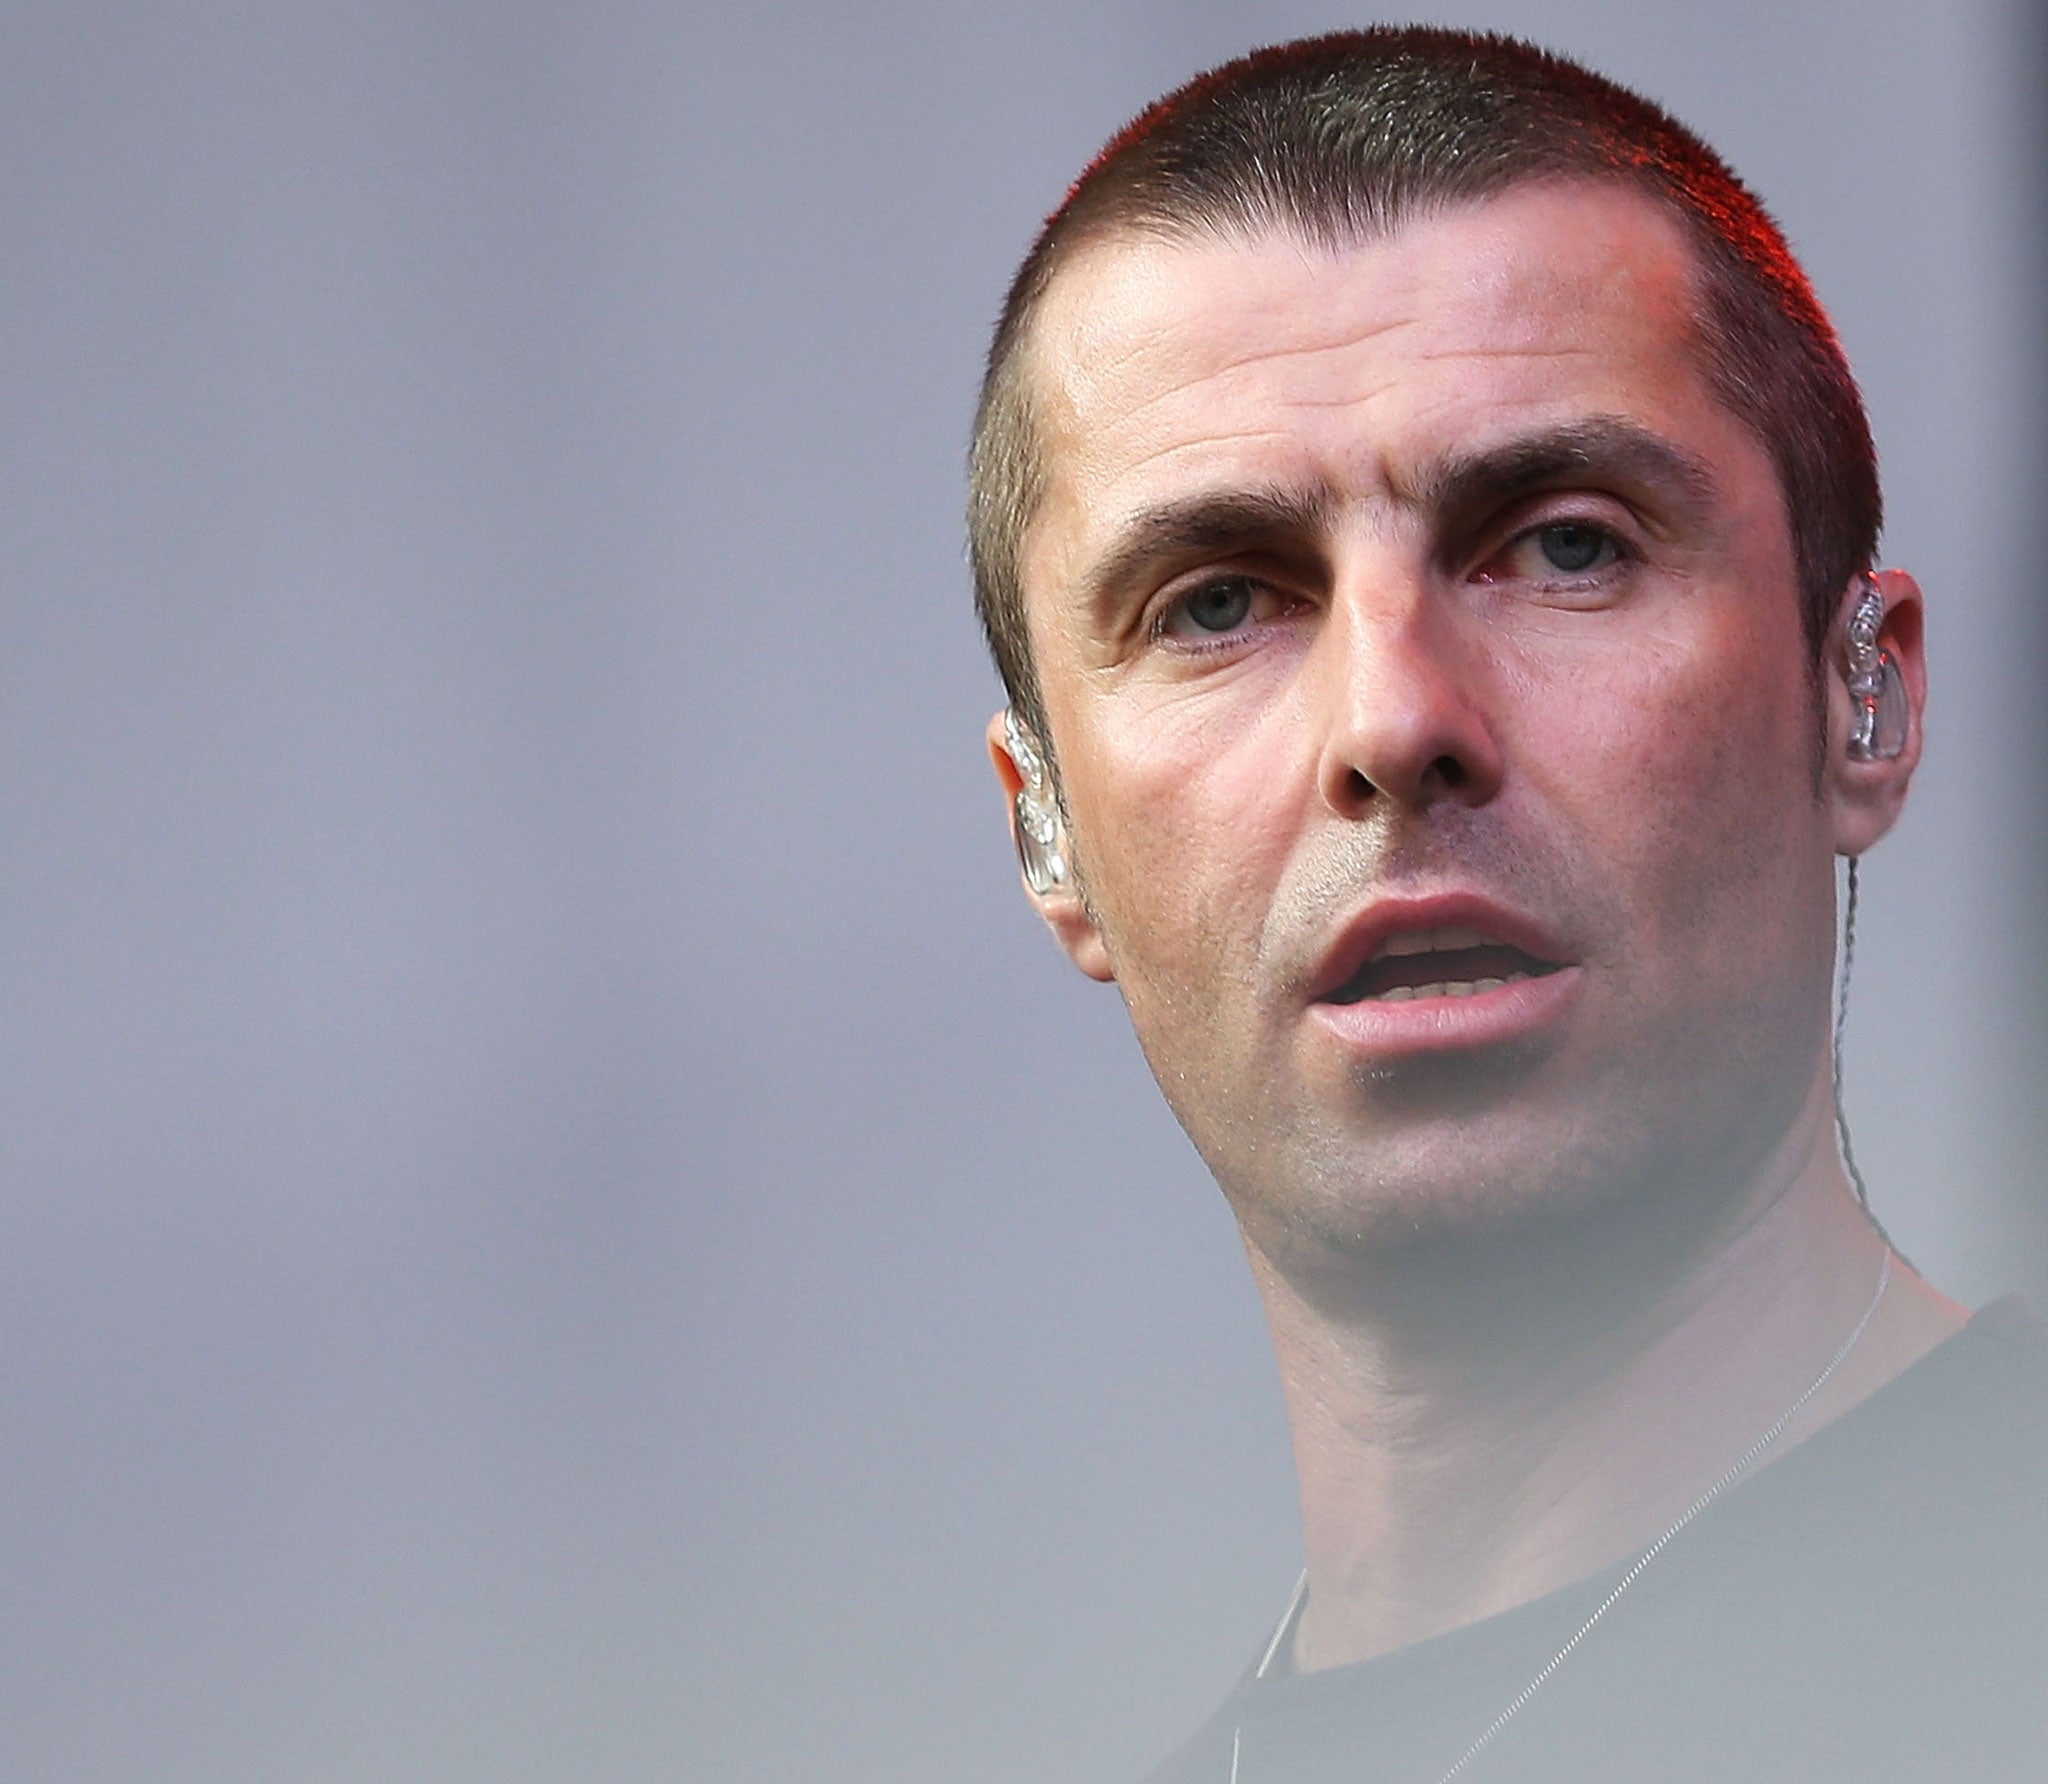 Liam Gallagher has lashed out at Rishi Sunak for his comments on the music industry